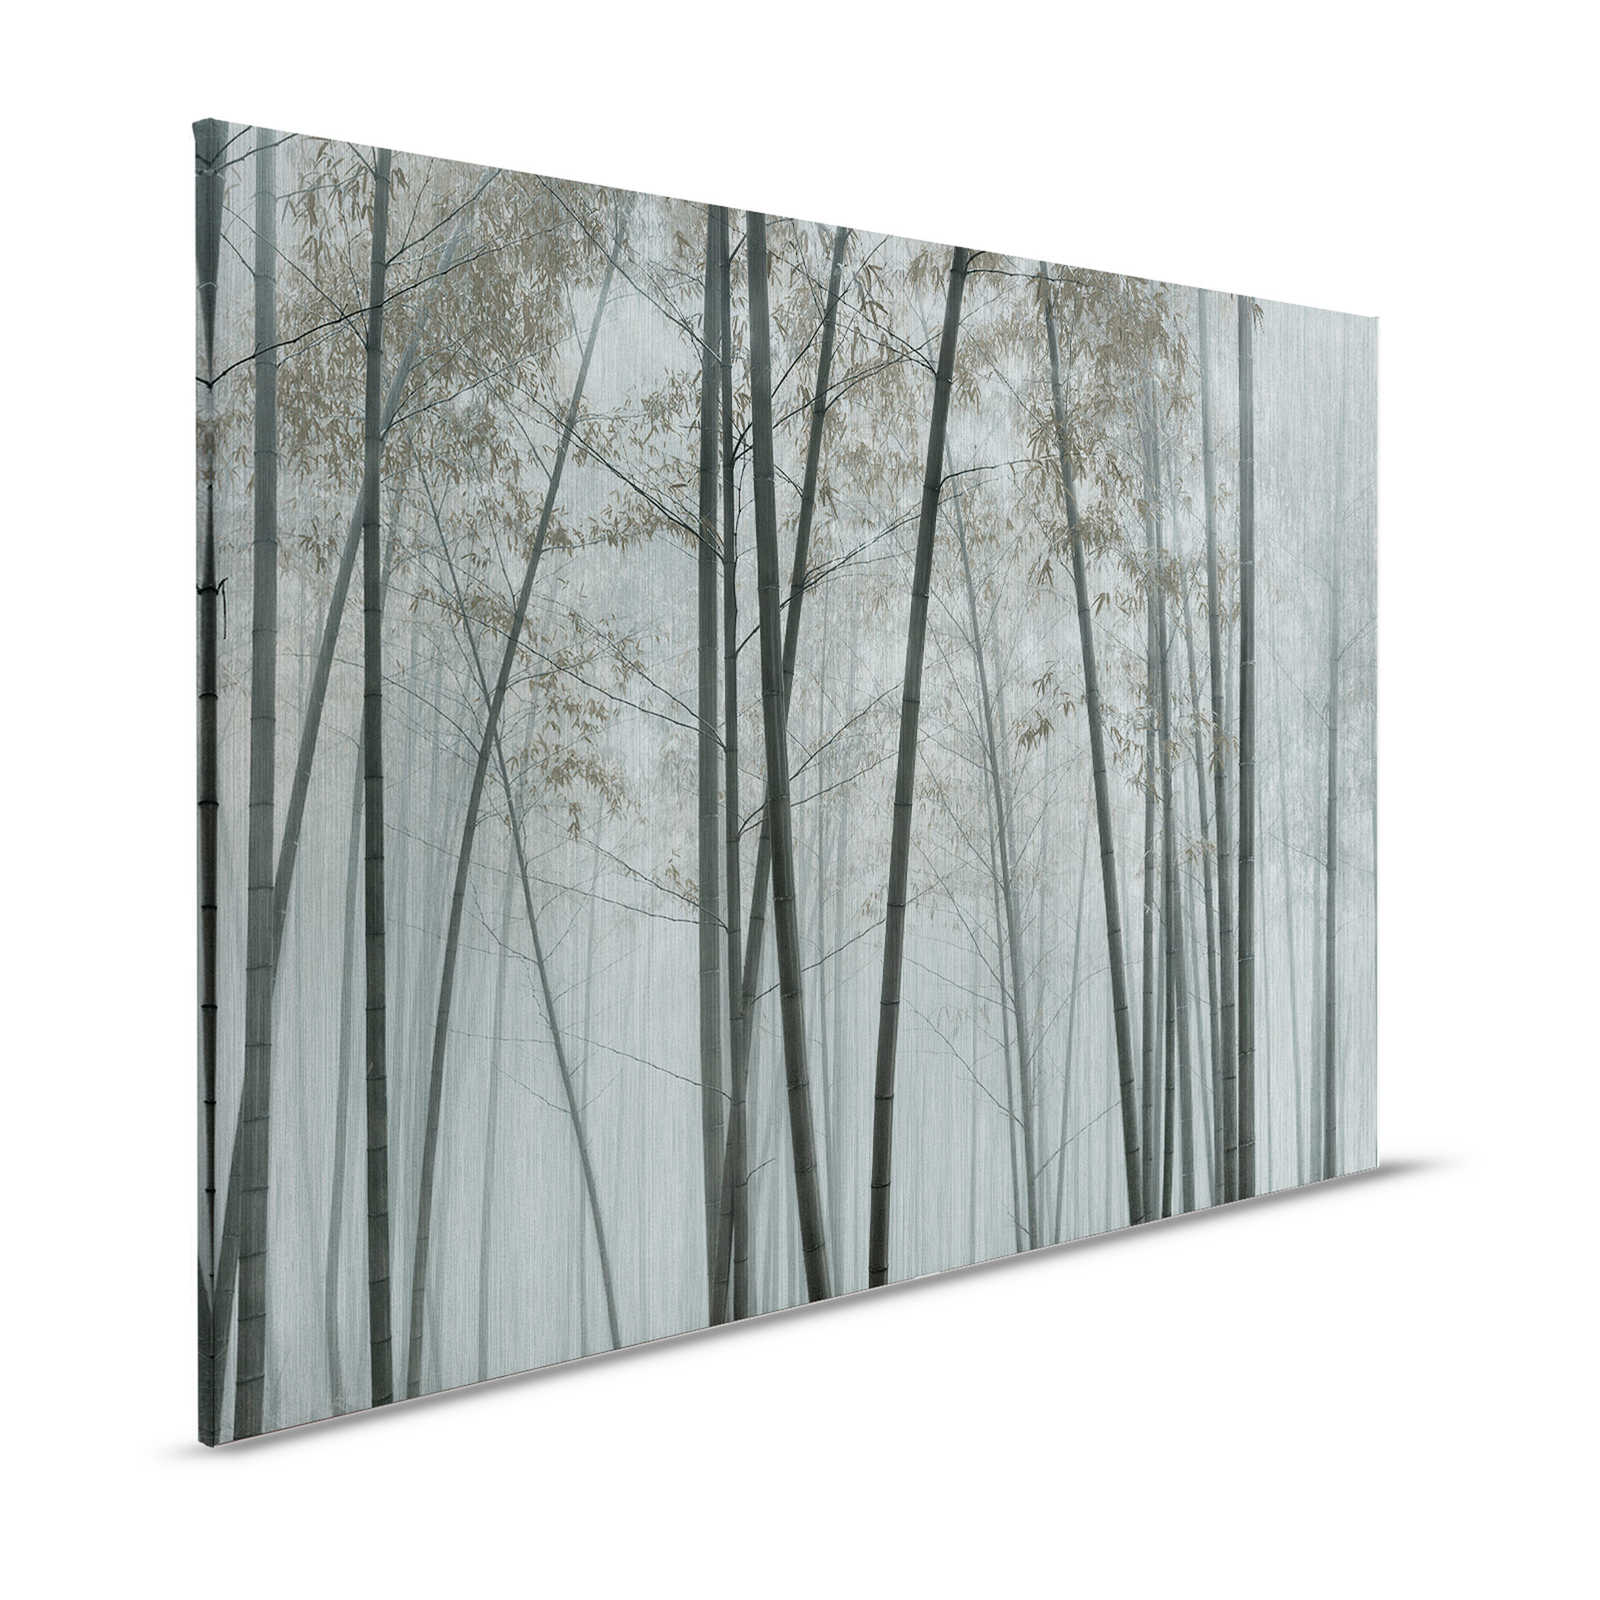 In the Bamboo 1 - Bamboo Canvas painting Bamboo forest in the mist - 1.20 m x 0.80 m
